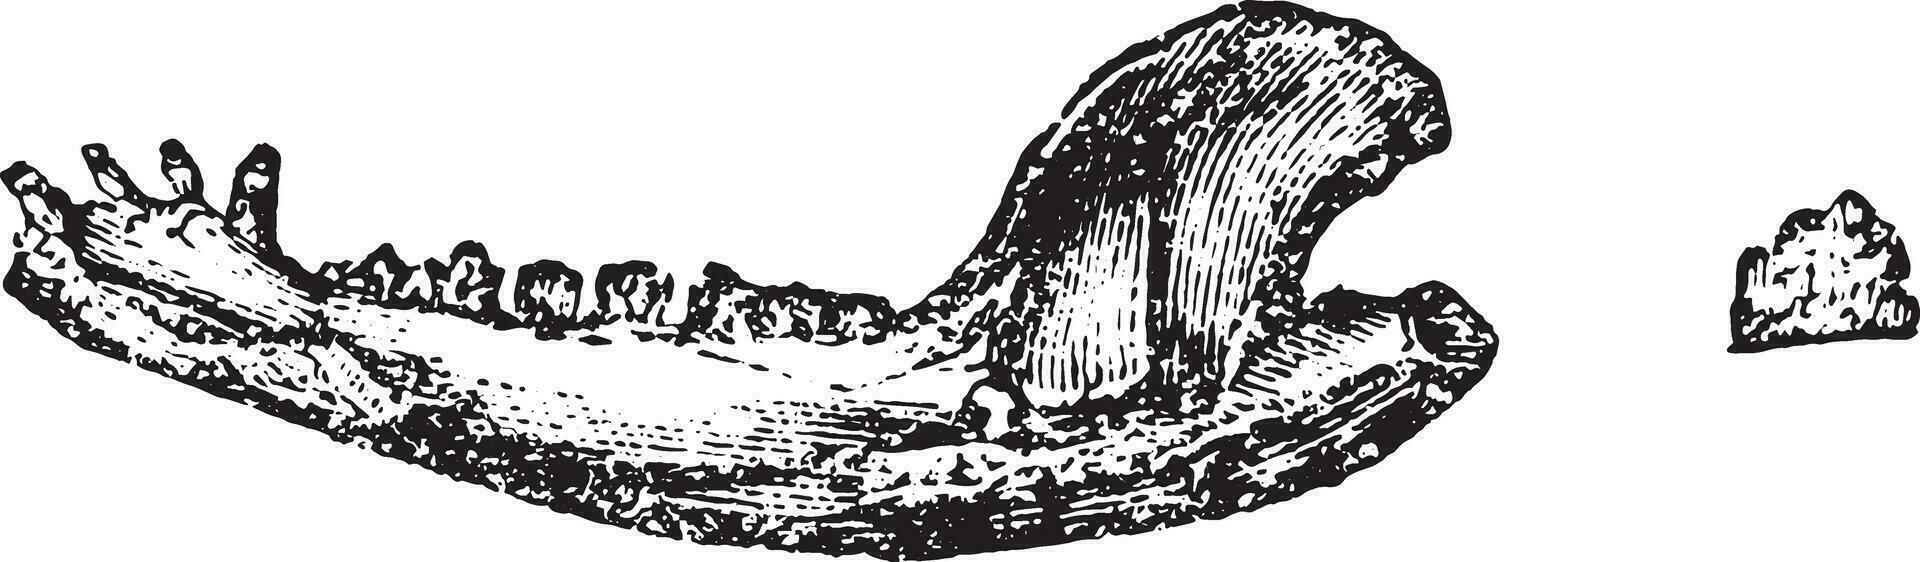 Lower jaw of didelphic, vintage engraving. vector